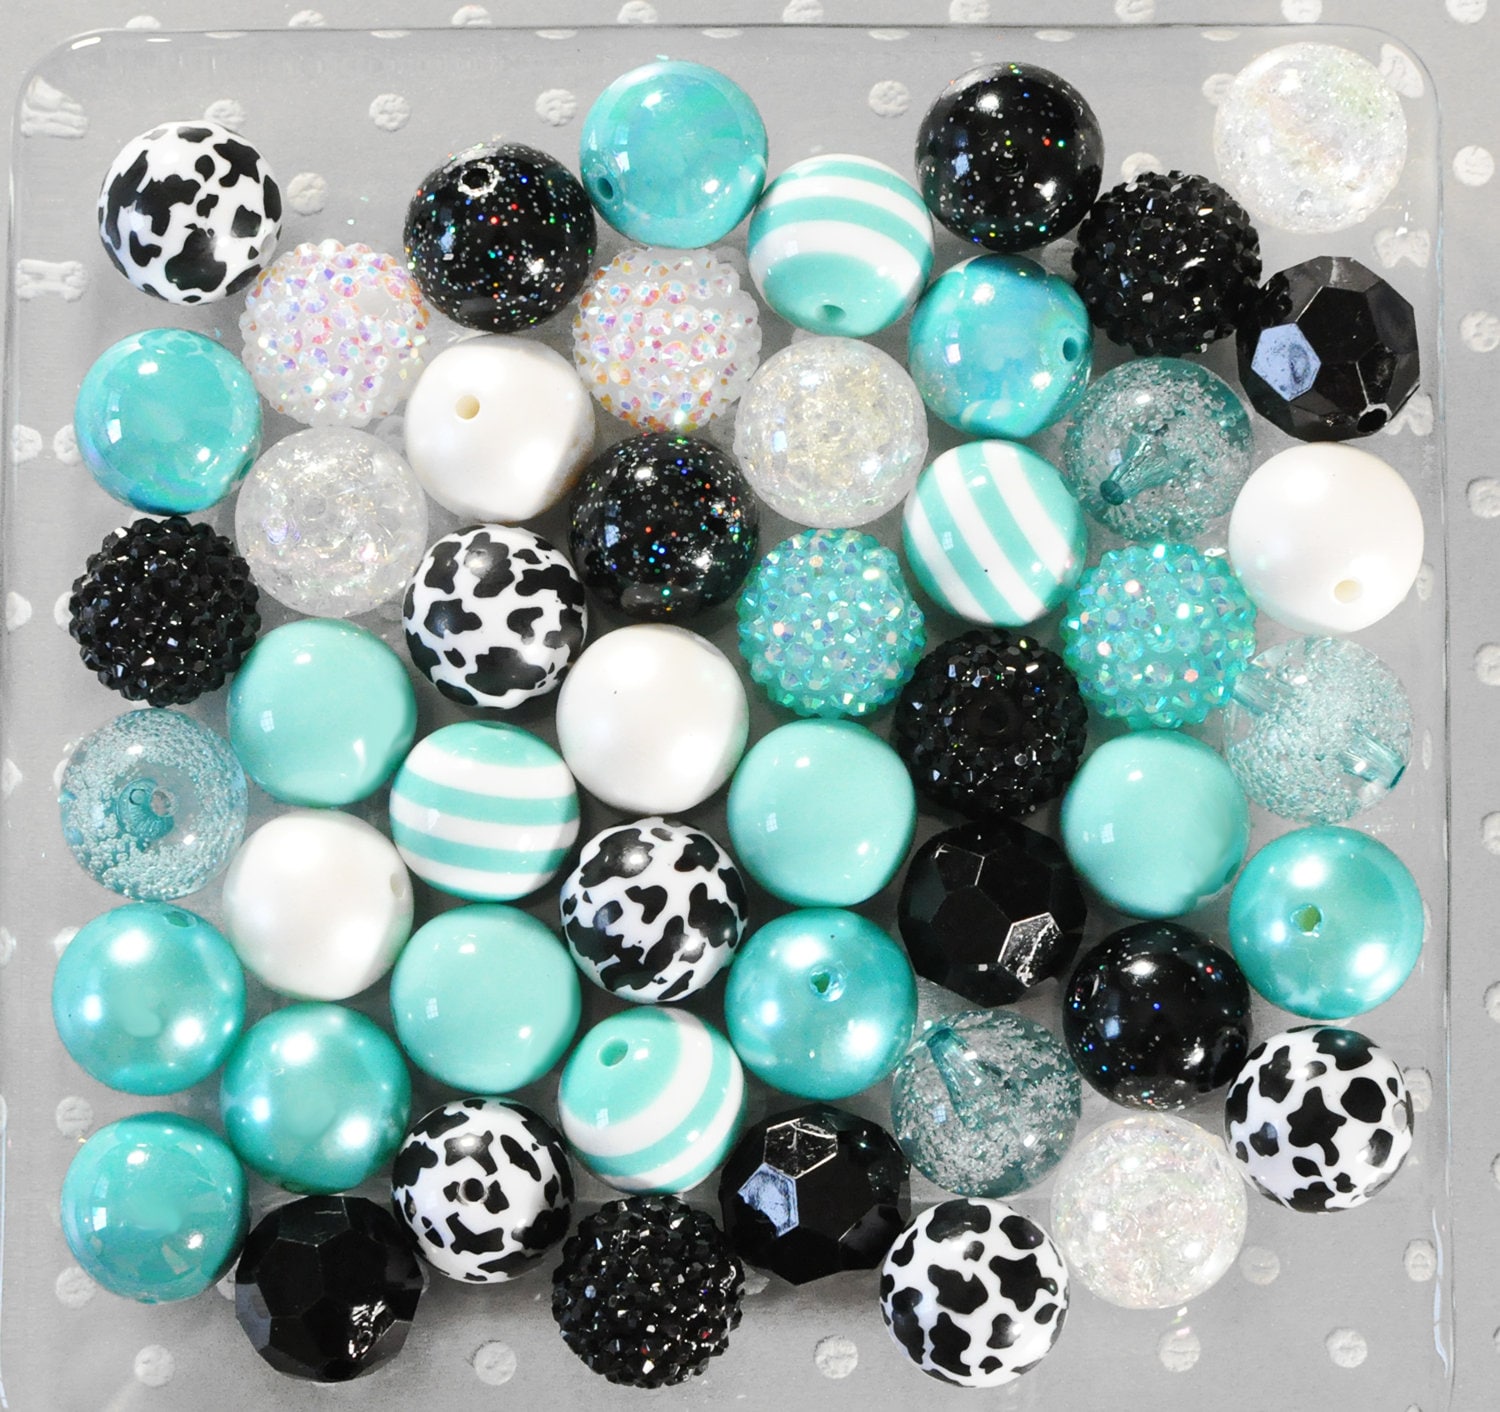 50pcs Beads For Pen Making Colorful Punched Beads Loose Beads Beadable Pen  Beads